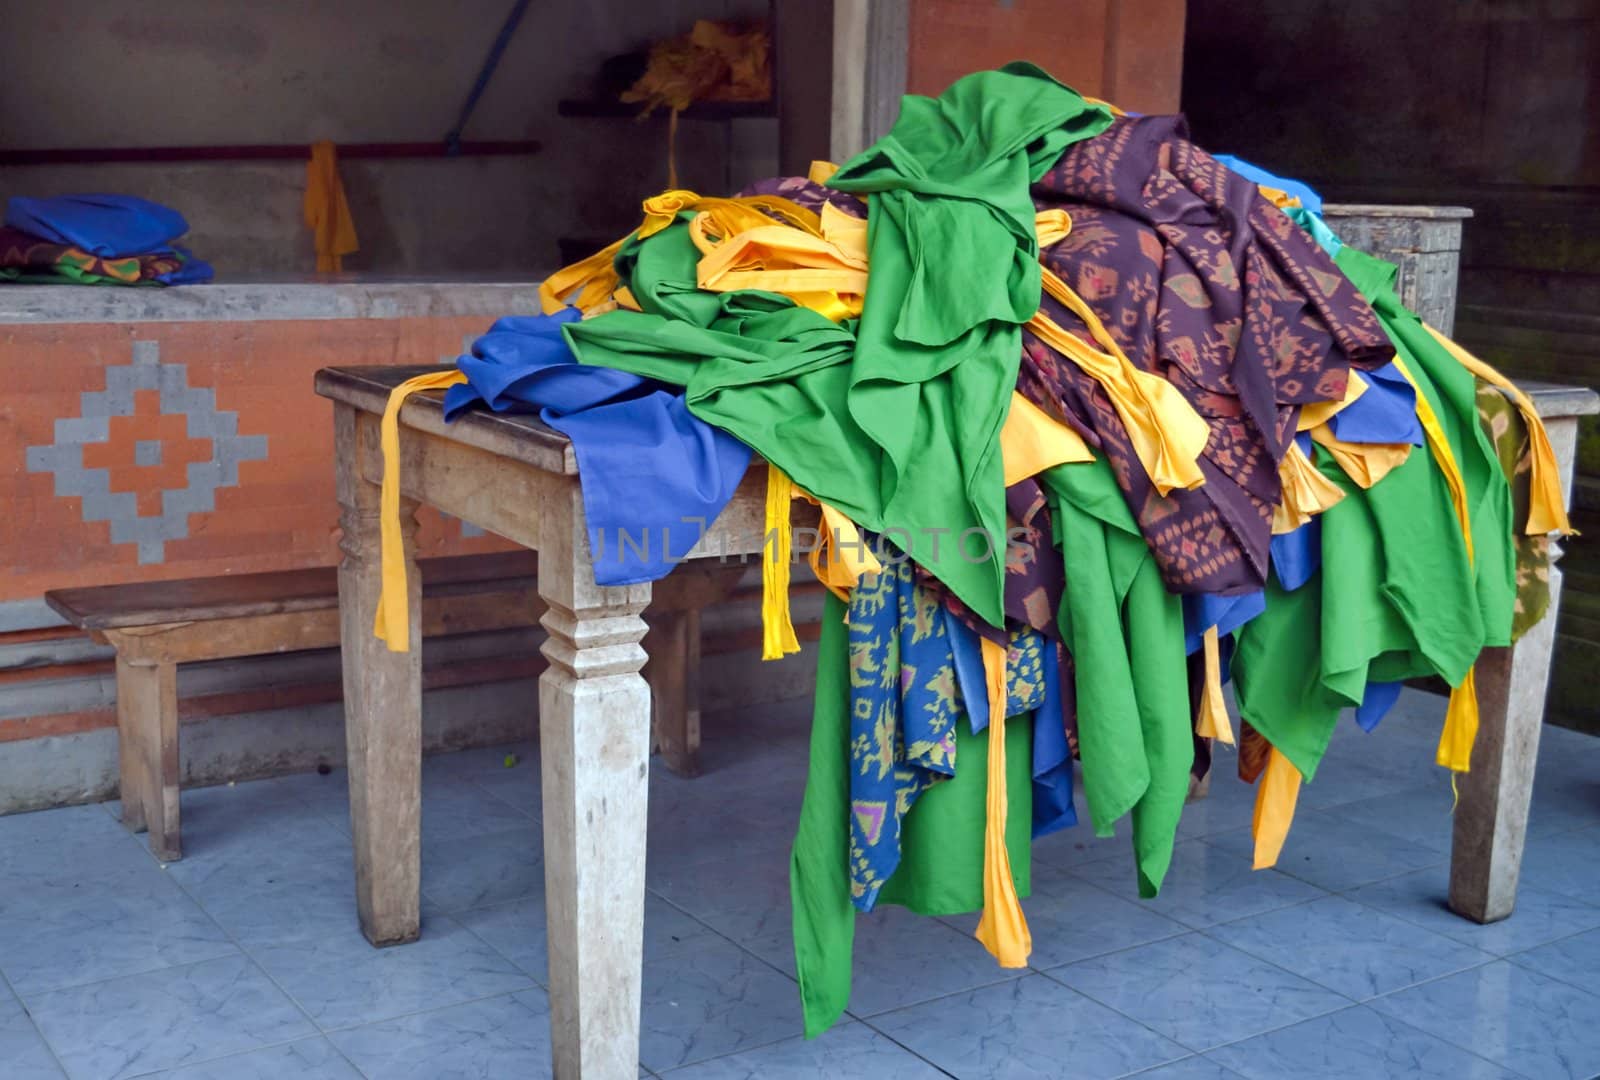 Hindu colorfull ceremony cloths pile over a table